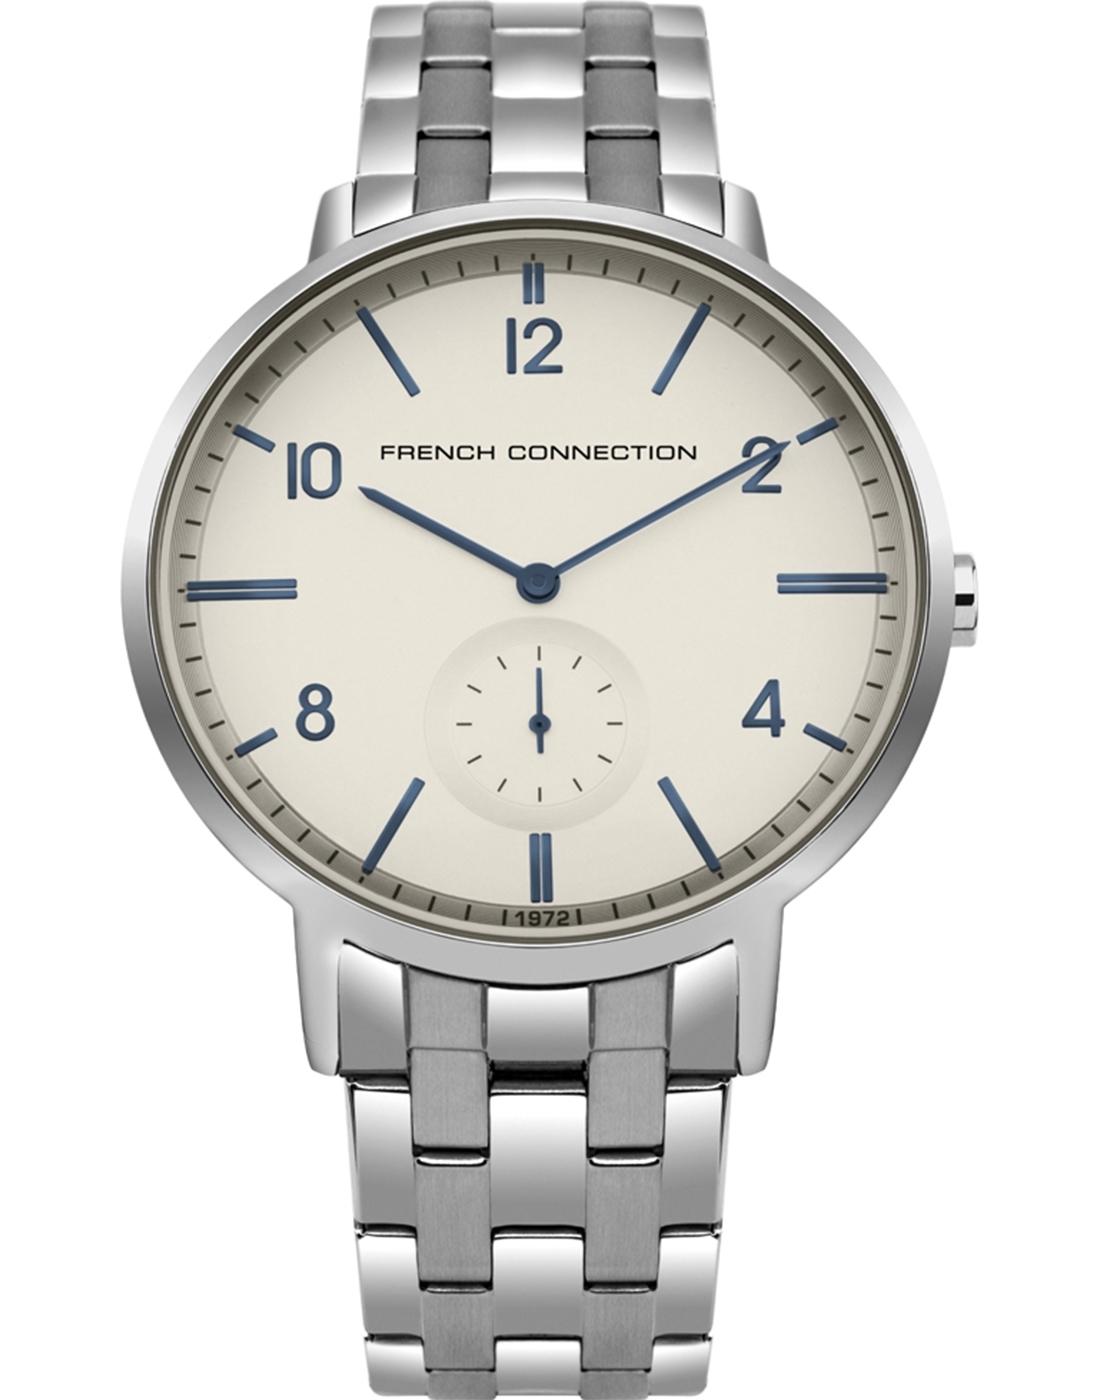 FRENCH CONNECTION Retro Classic Men's Watch